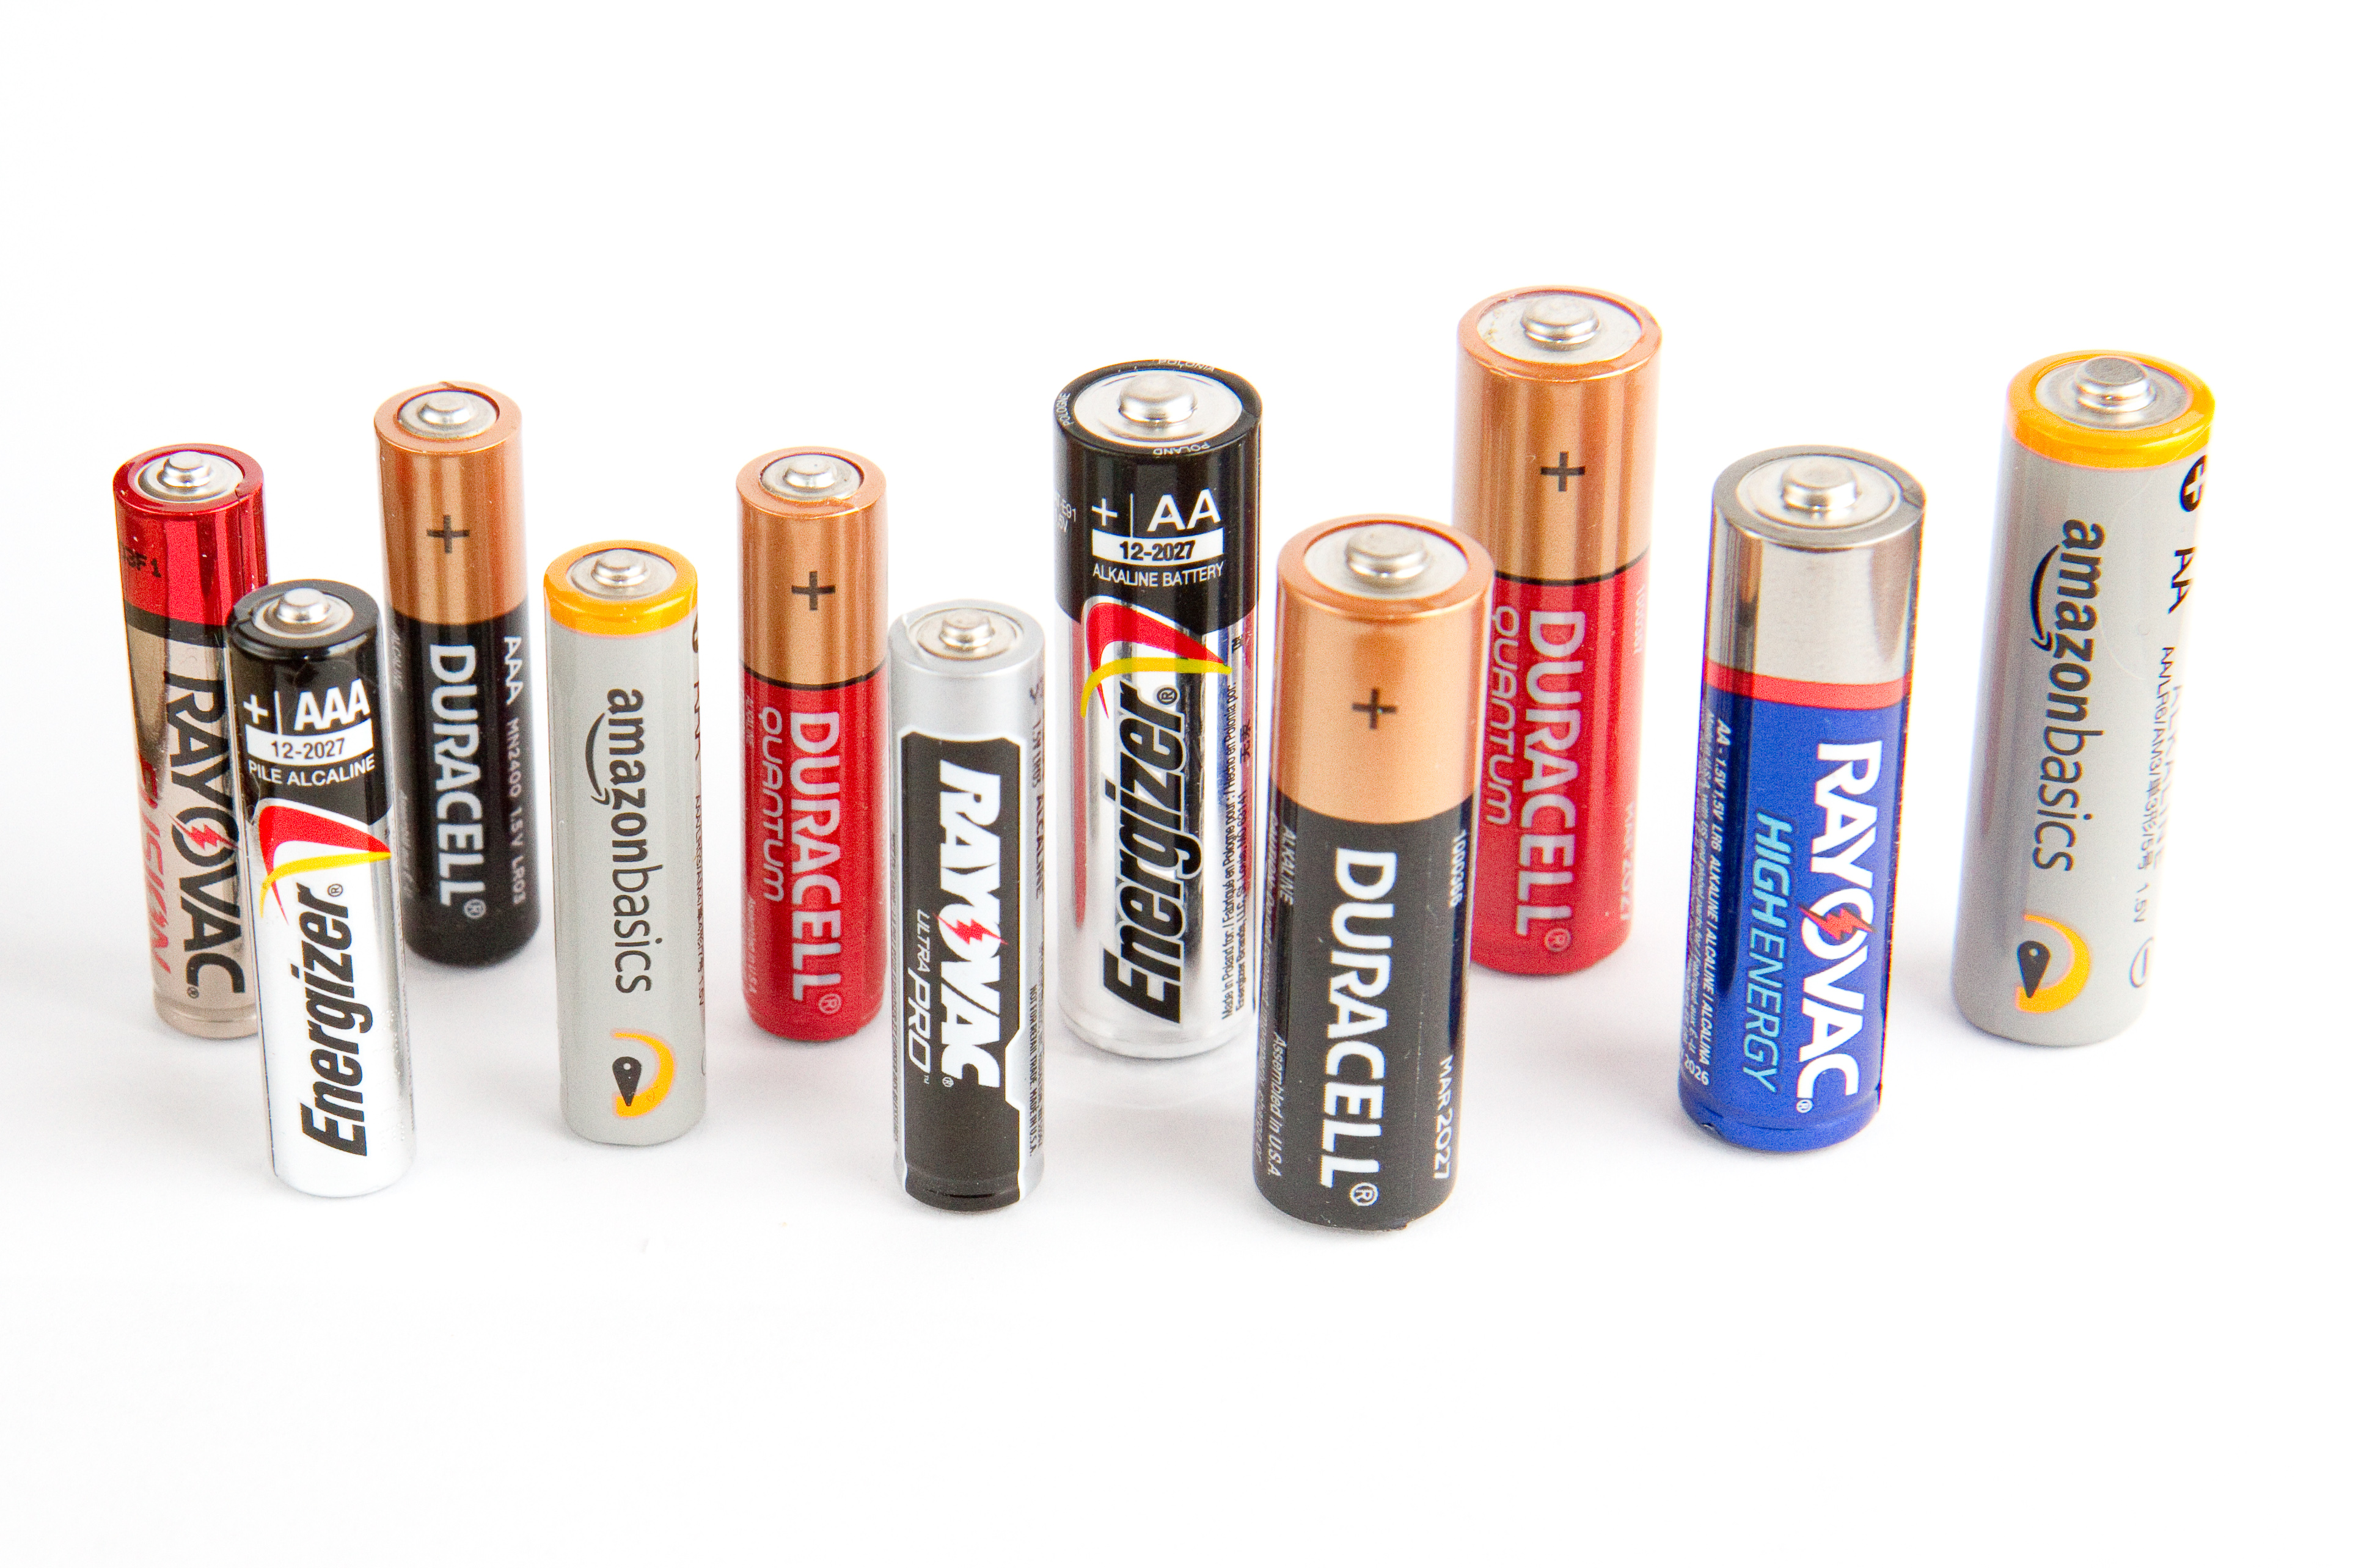 » Are all alkaline battery brands the same?